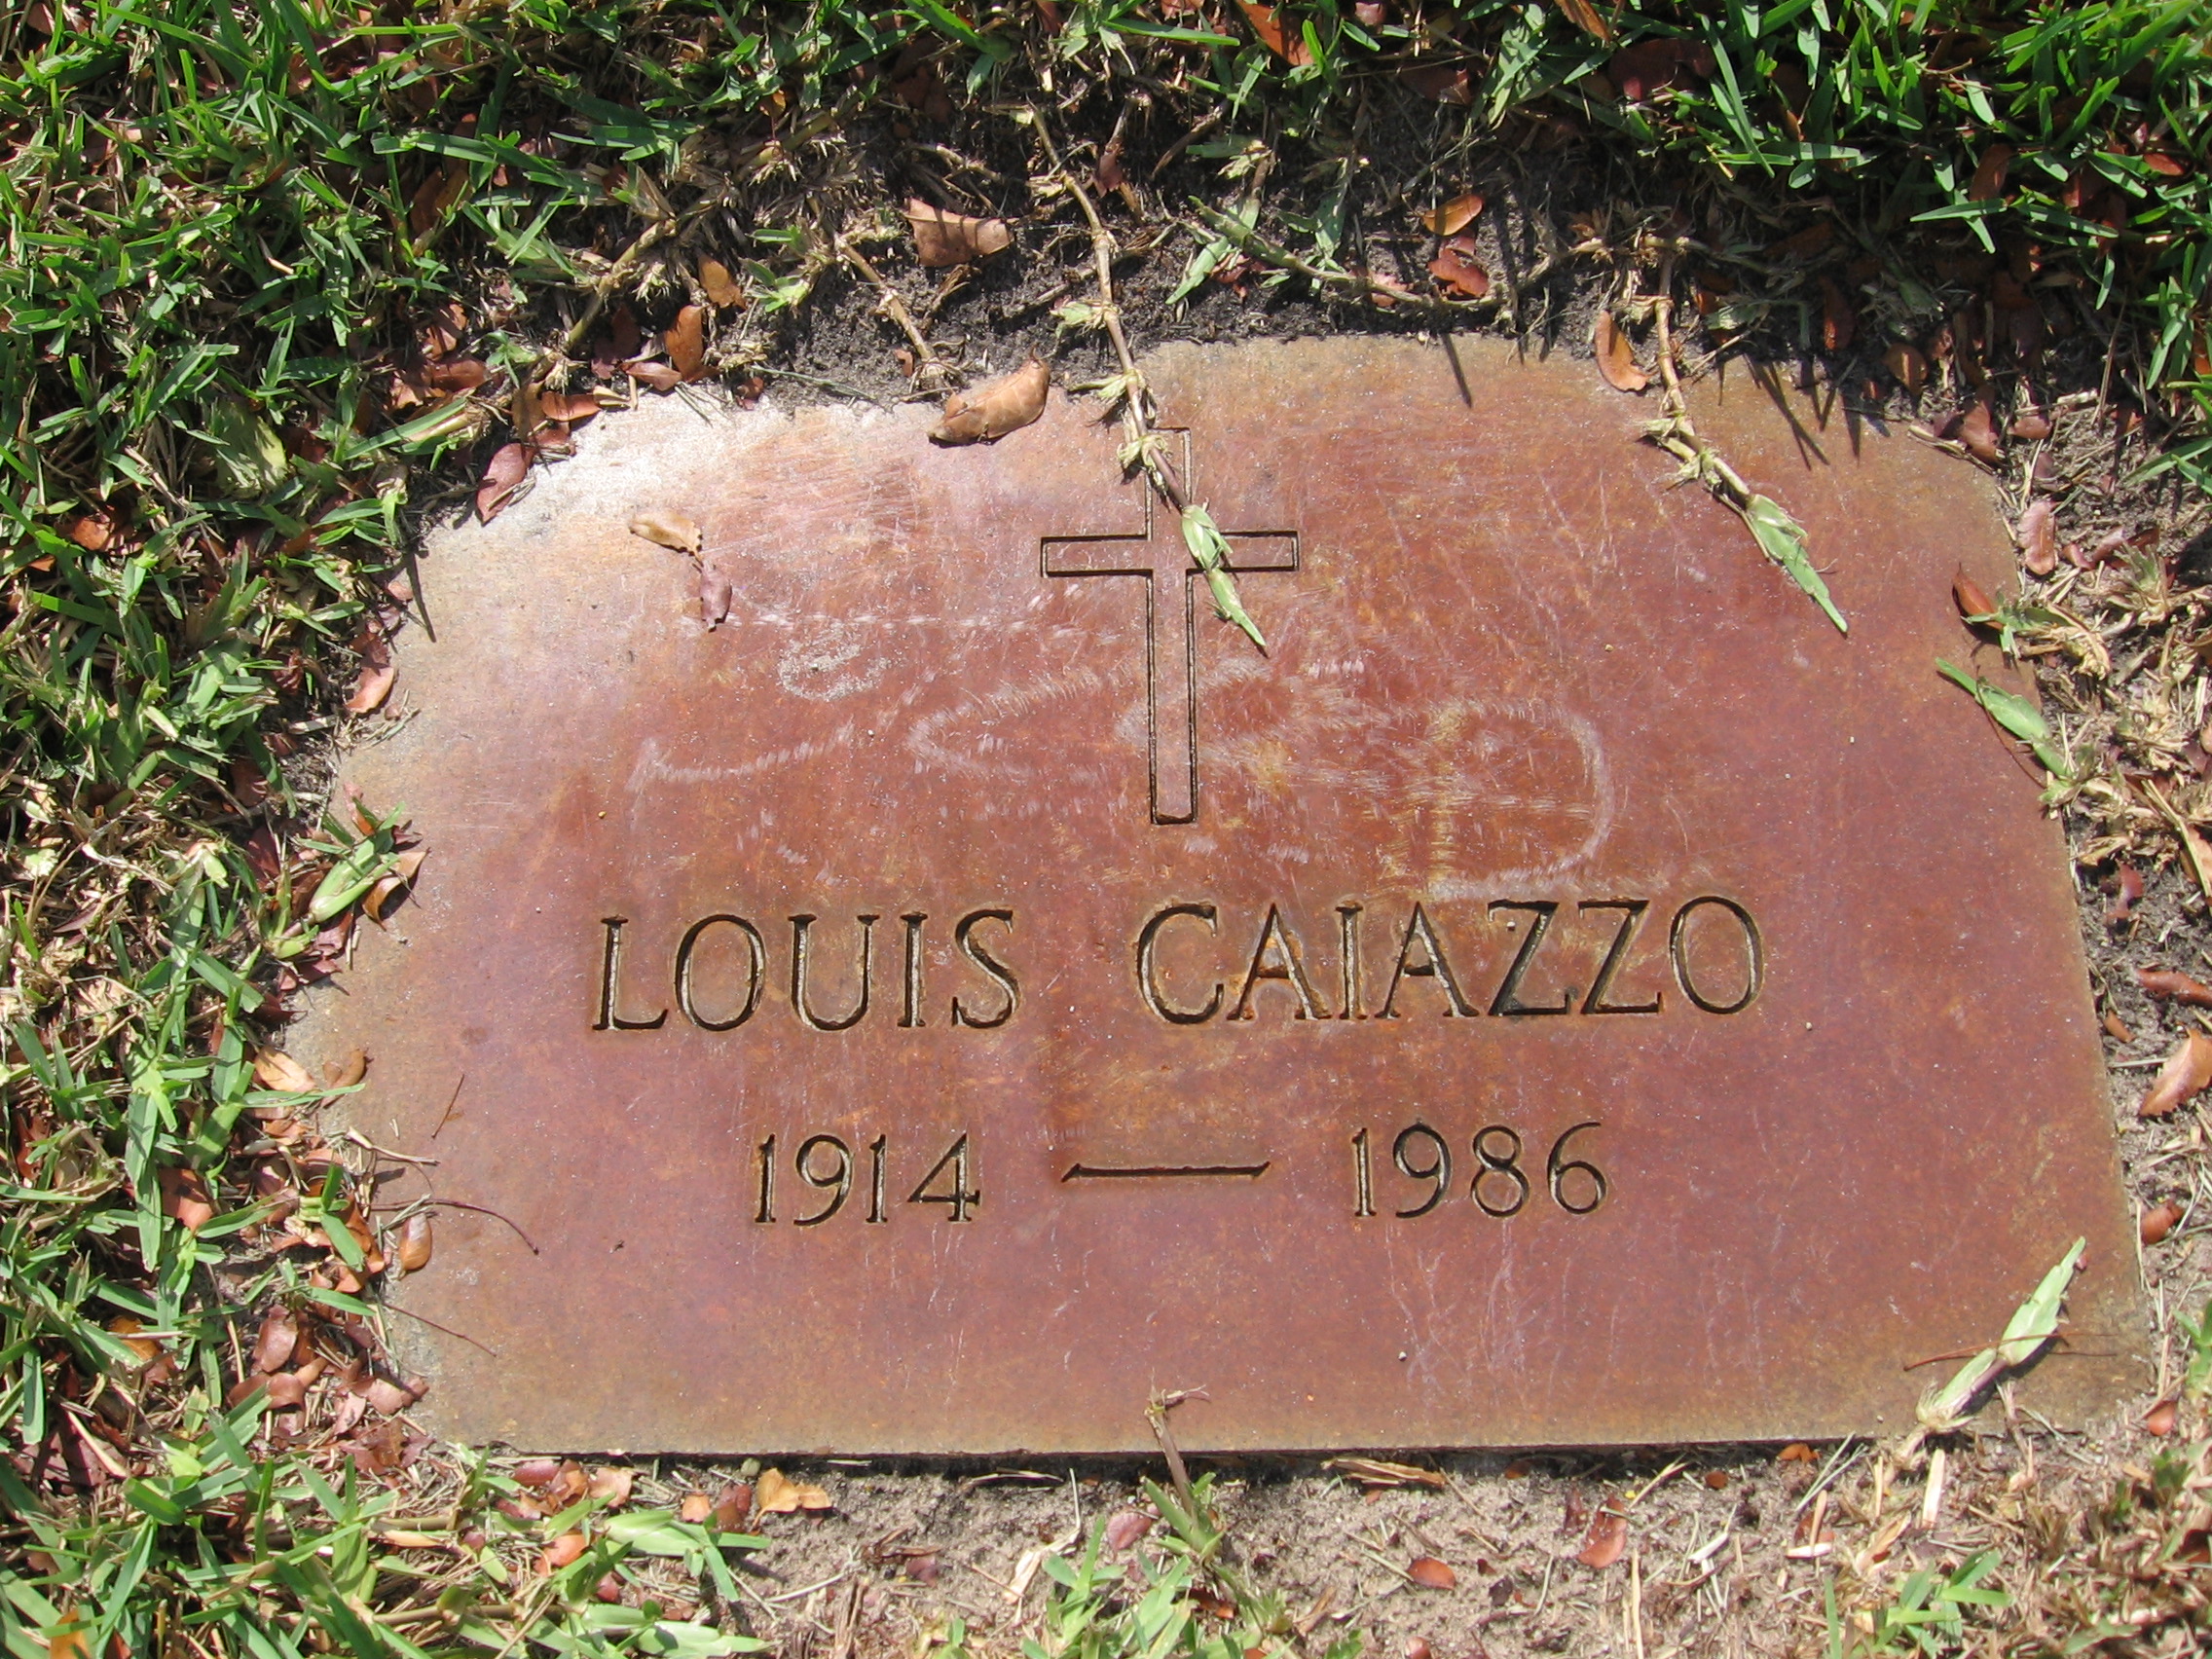 Louis Caiazzo